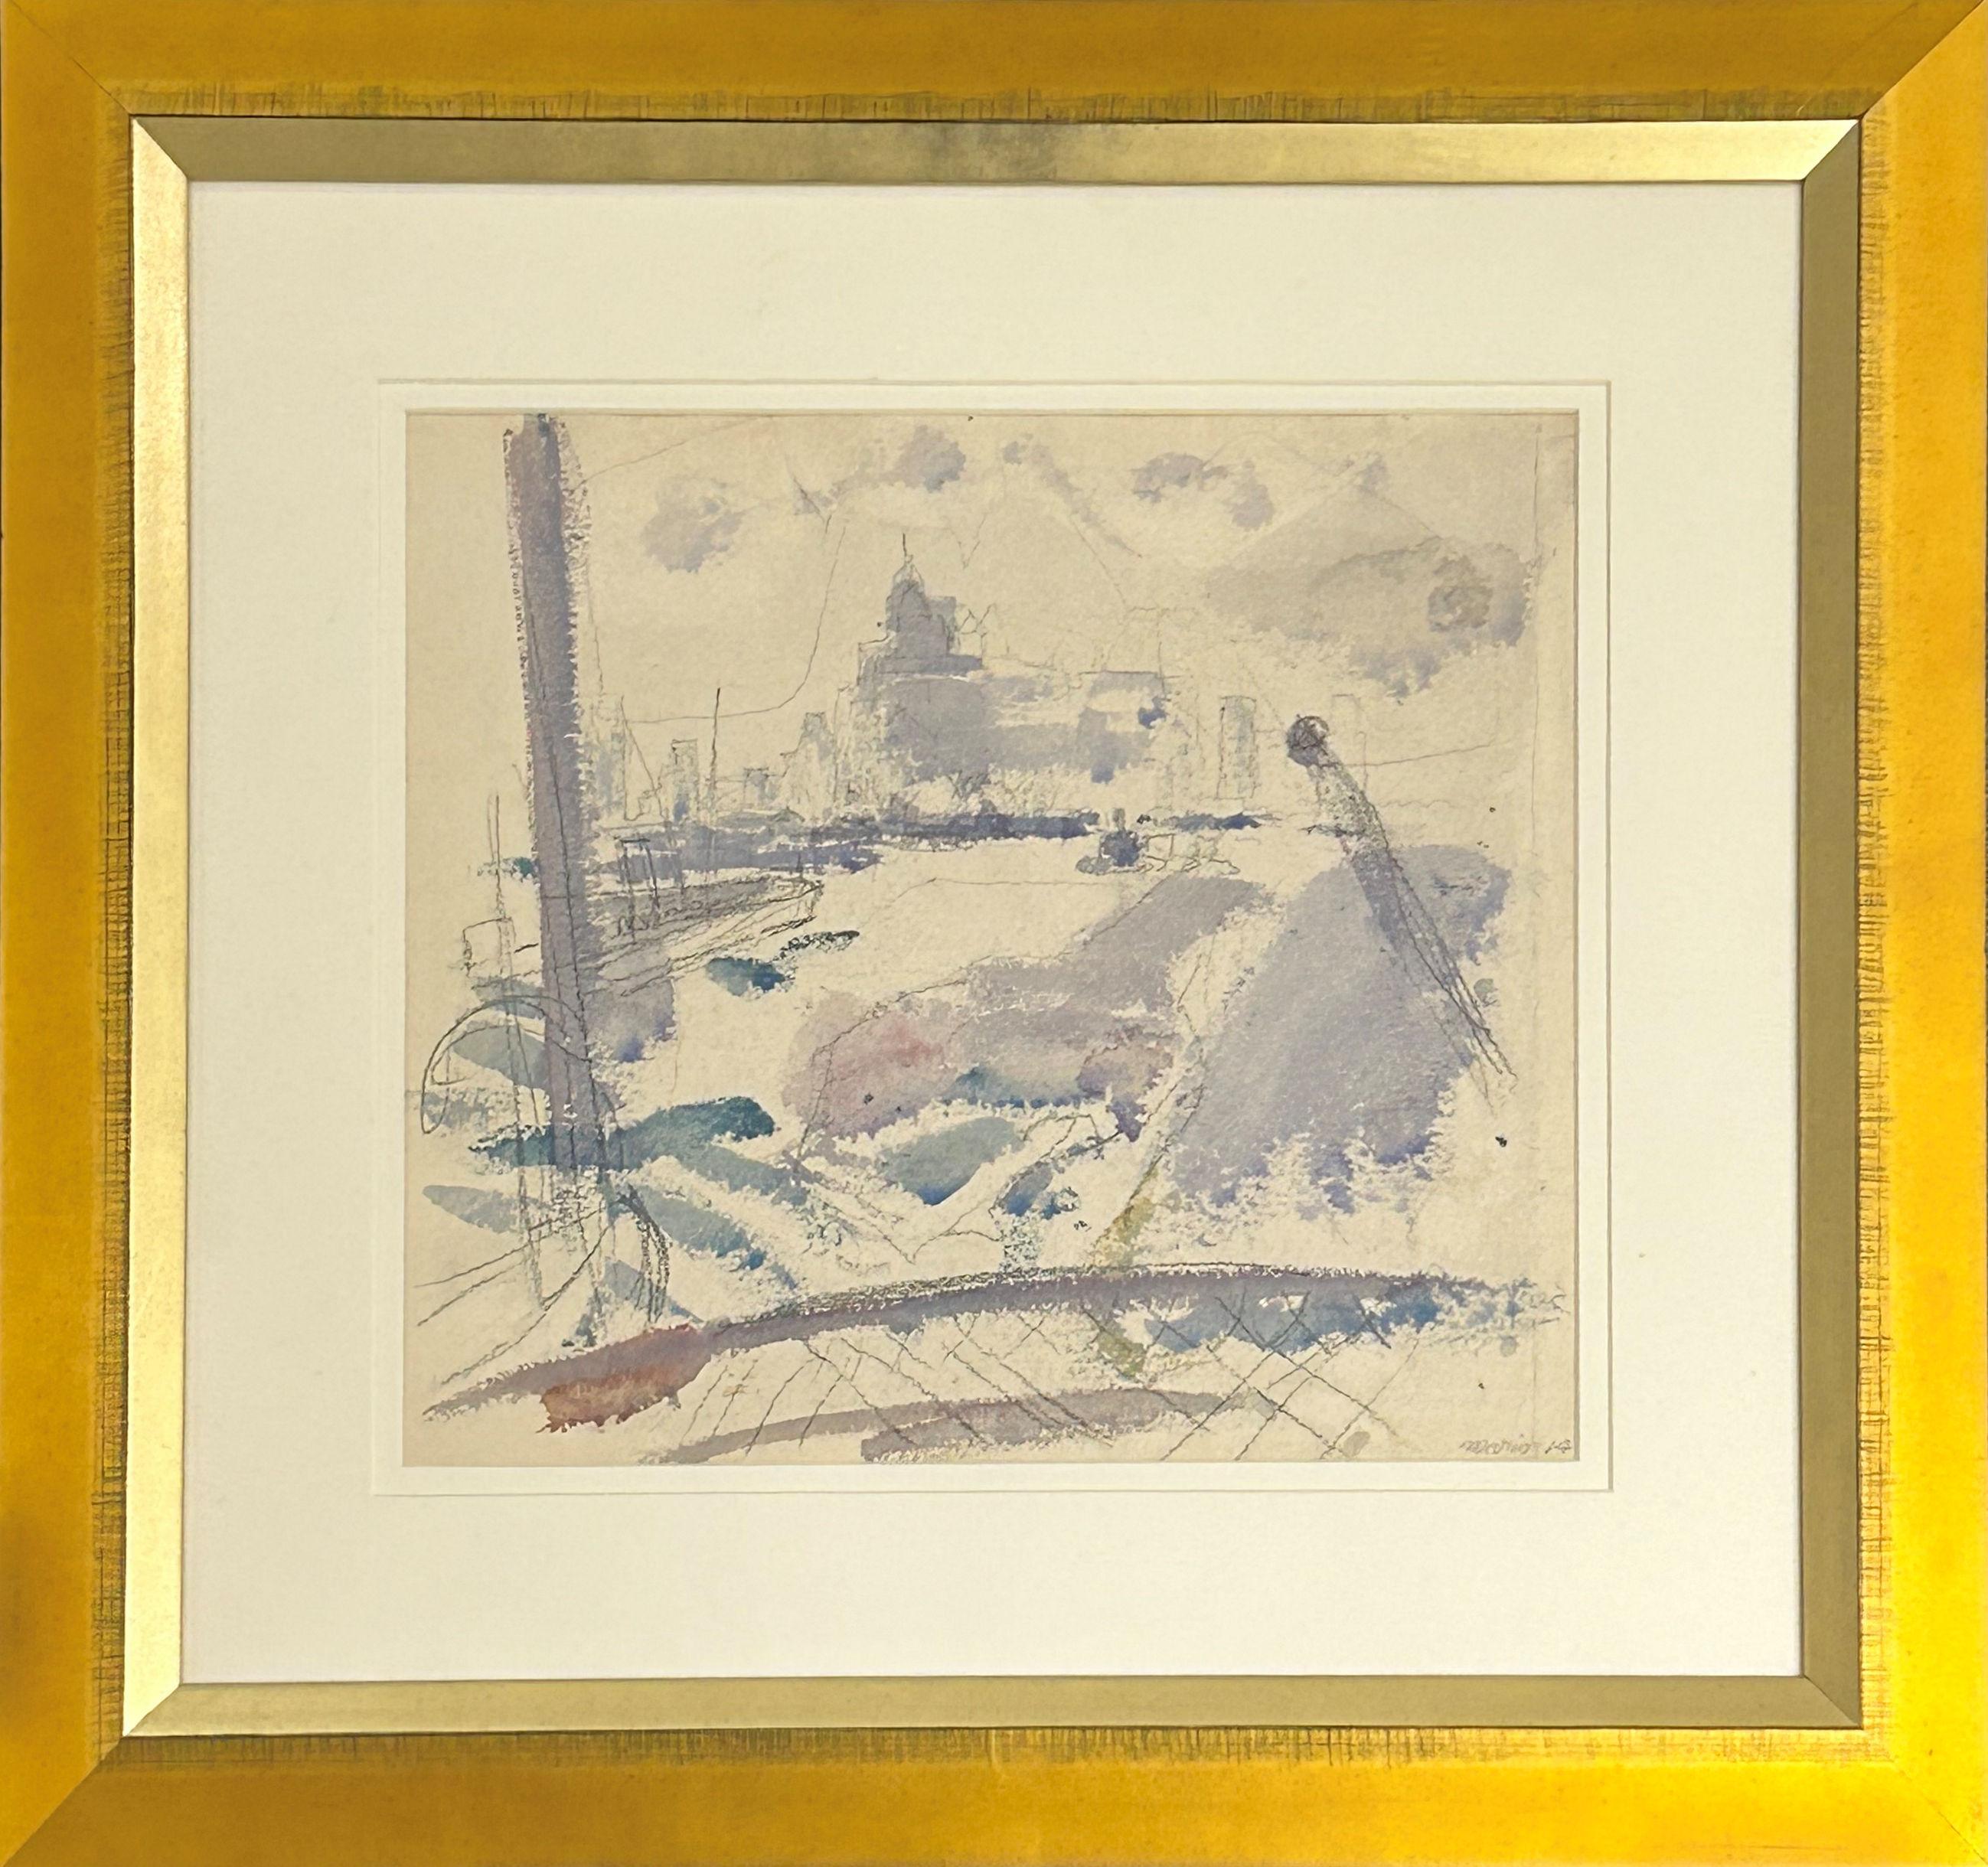 John Marin
New York from the Ferry, 1914
Signed and dated lower right
Watercolor and graphite on paper
11 x 12 3/4 inches

Provenance:
An American Place, New York
Kennedy Galleries, Inc., New York
Christie's, New York, March 16, 1990, Lot